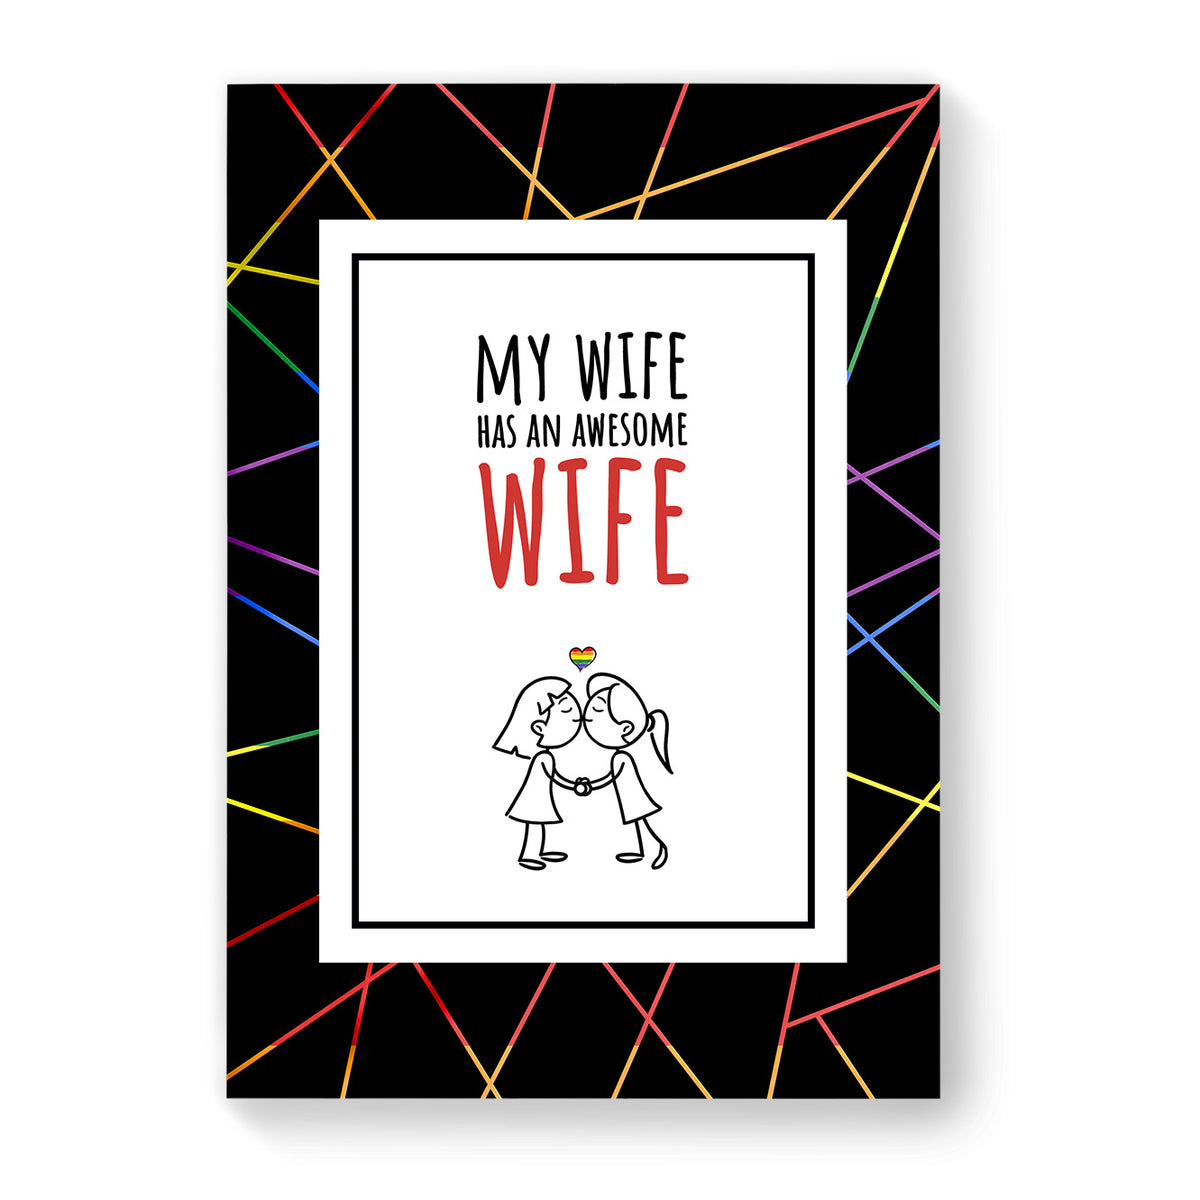 My Wife has an Awesome Wife - Lesbian Gay Couple Card - Black Geometric | Gift